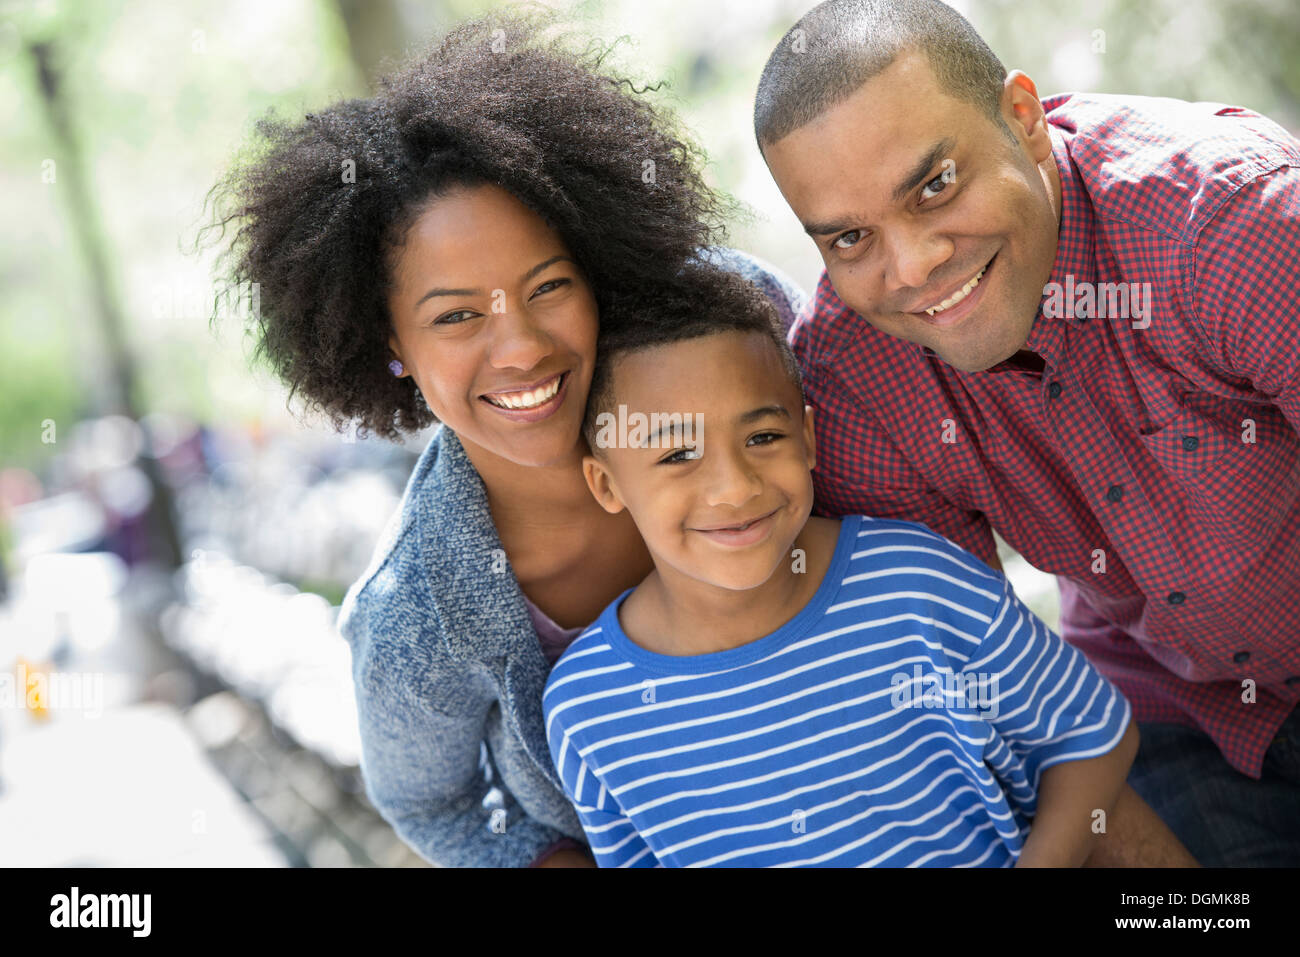 Two adults and a young boy taking photographs with a smart phone. Stock Photo